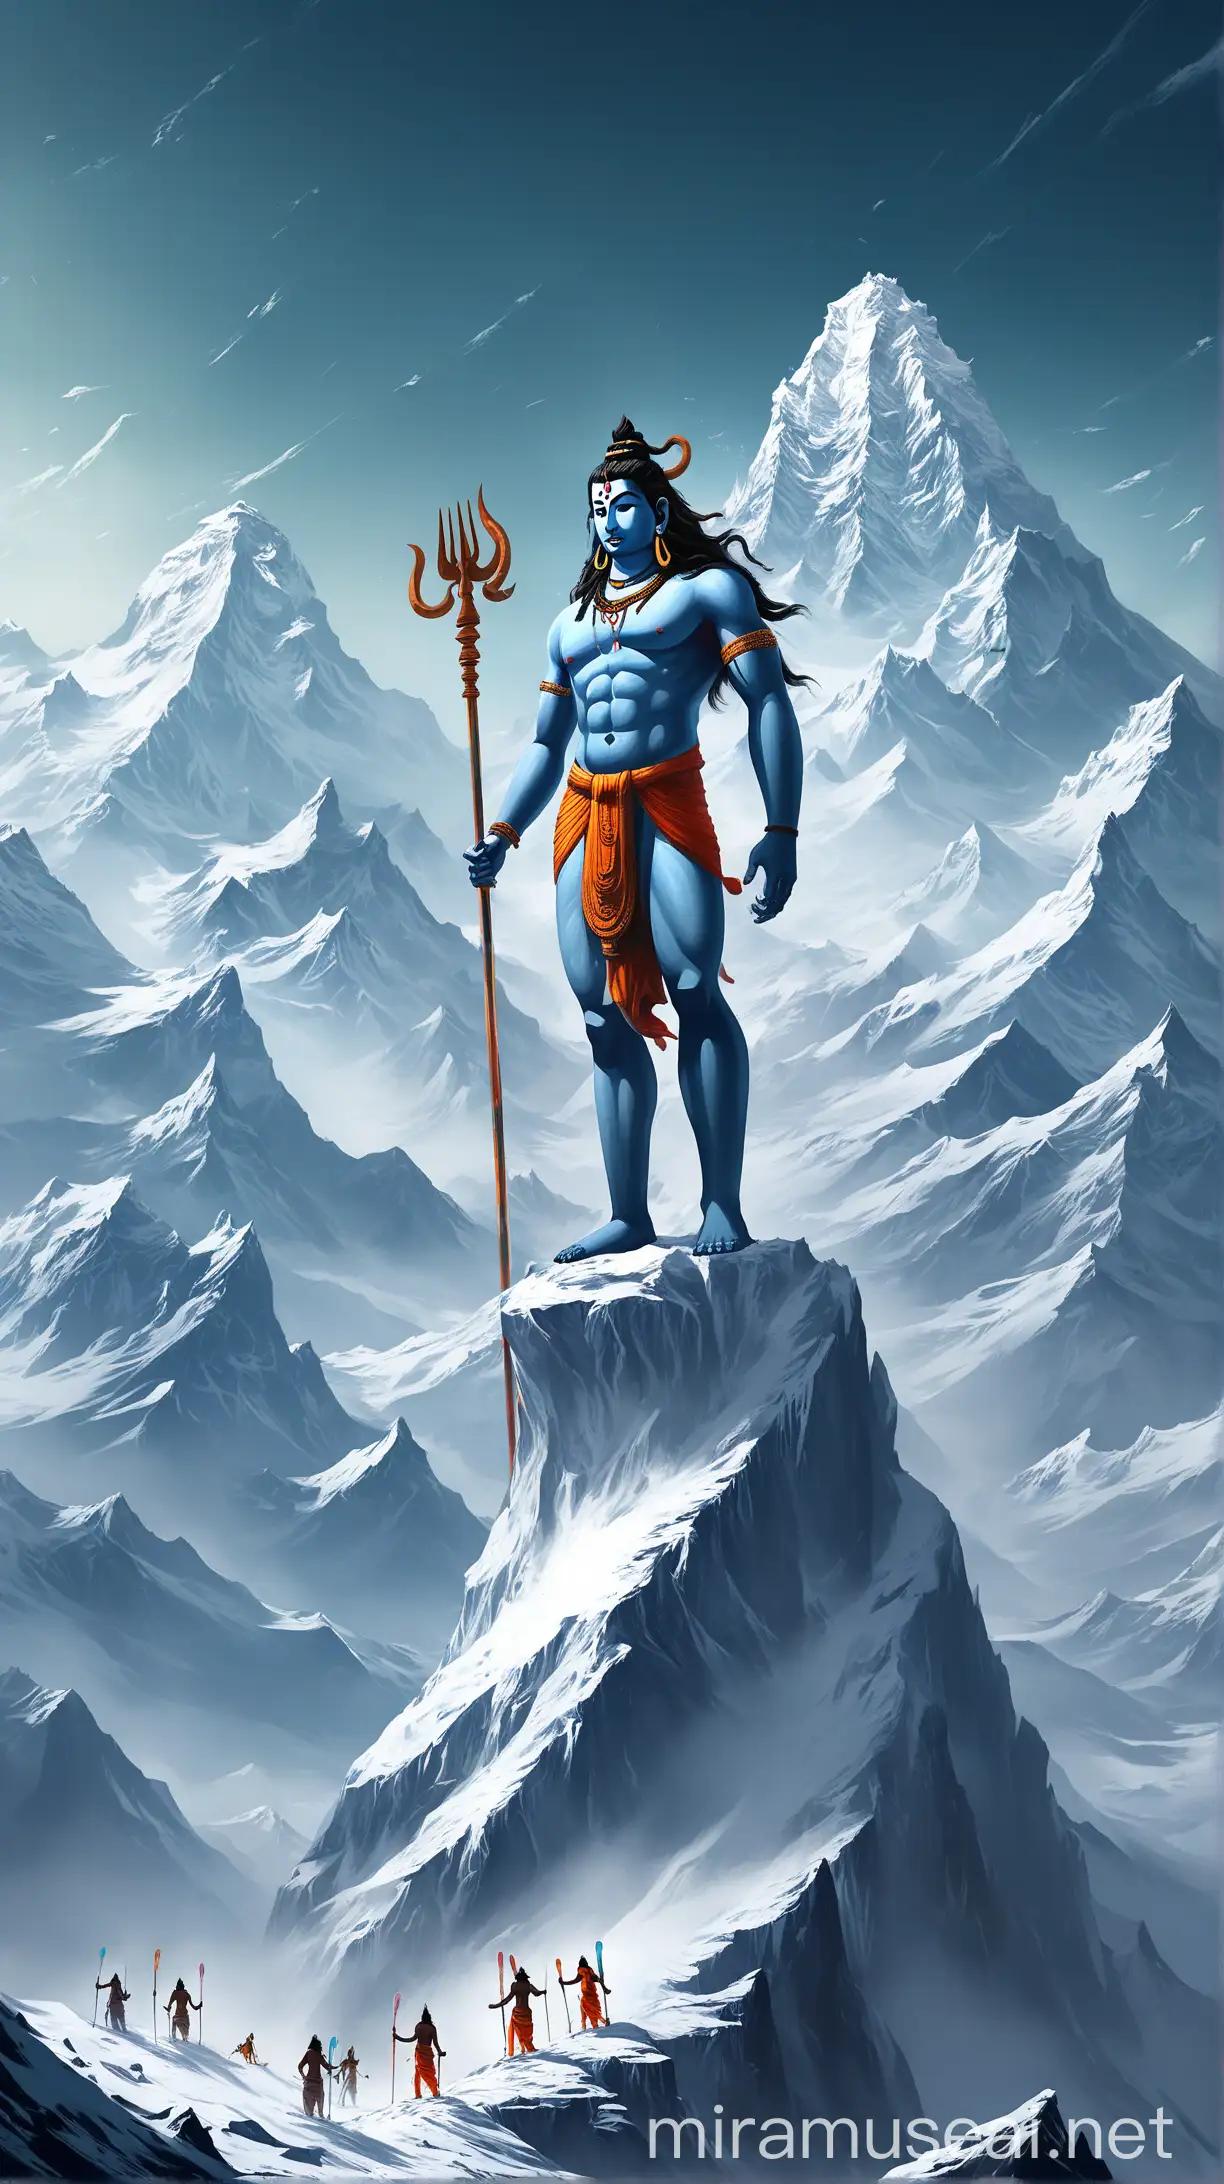 there is a man that is standing on a mountain with skis, lord shiva, god shiva the destroyer, shiva, inspired by Kailash Chandra Meher, himalayas, rising from mountain range, amazing wallpaper, epic digital painting, hd wallpaper, epic digital art illustration, mobile wallpaper, 4k fantasy art, epic illustration, concept art wallpaper 4k, 8k fantasy art